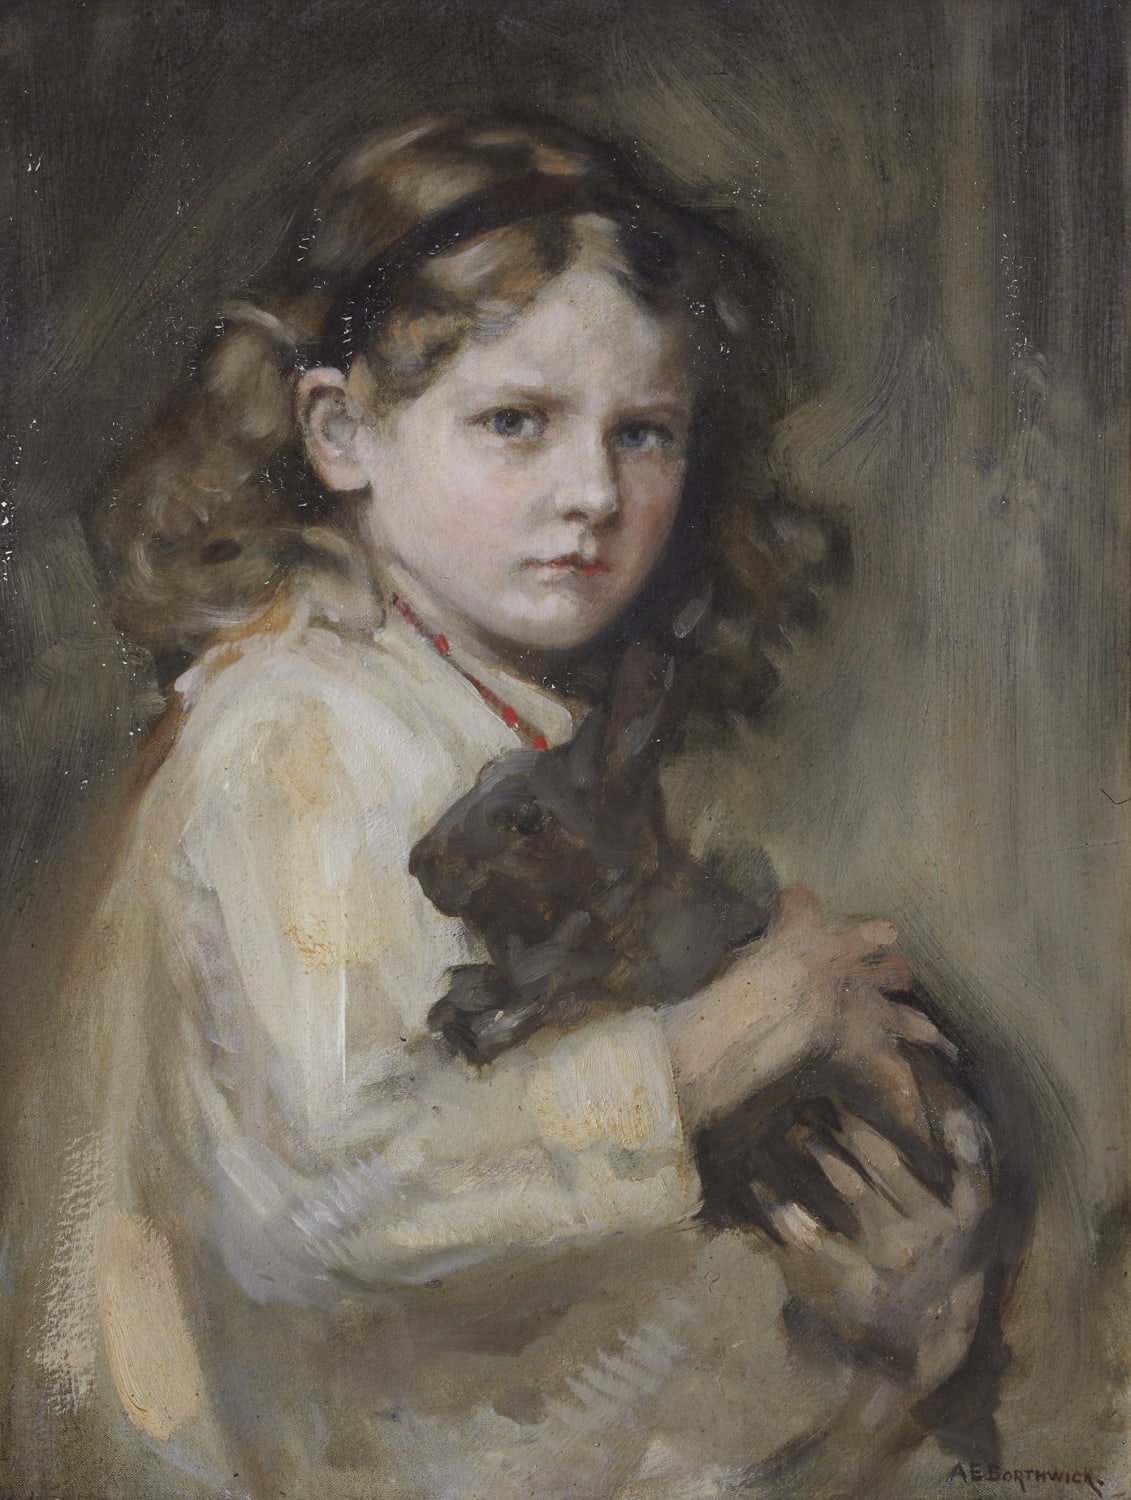 Alfred Edward Borthwick RSA (1871-1955), Grizel and her Pet  oil on canvas, around 1921, 60.7 x 45.5cm  RSA collections (Thorburn Ross Memorial Fund Purchase, 1921). 1993.066